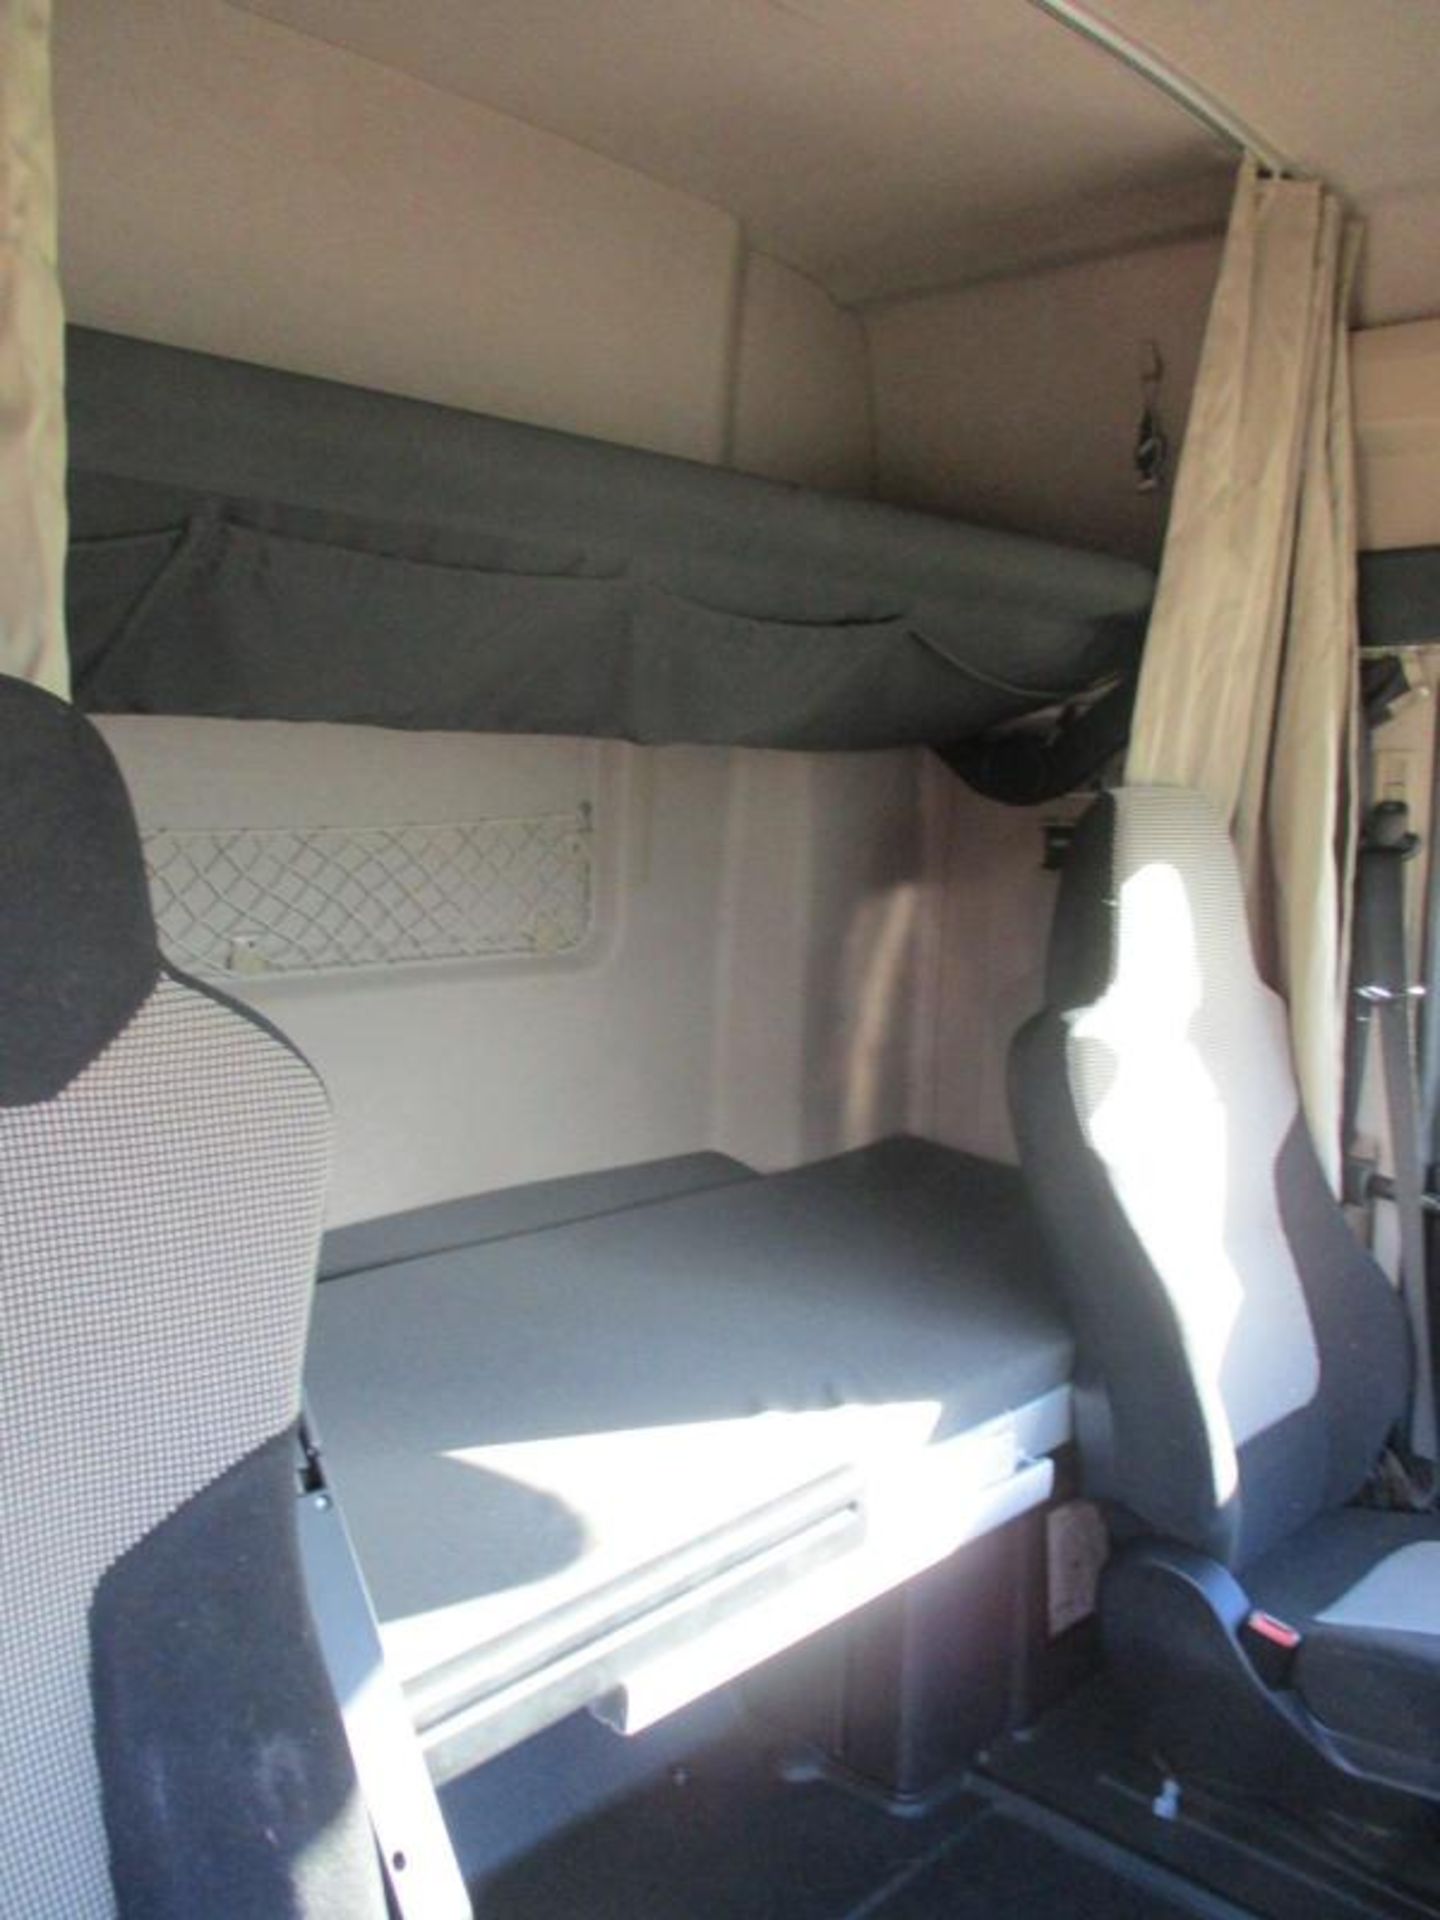 CLIMATE-CONTROLLED CABIN: MAN TGX 460 XXL WITH AIR CON AND HEATED SEAT - Image 5 of 23